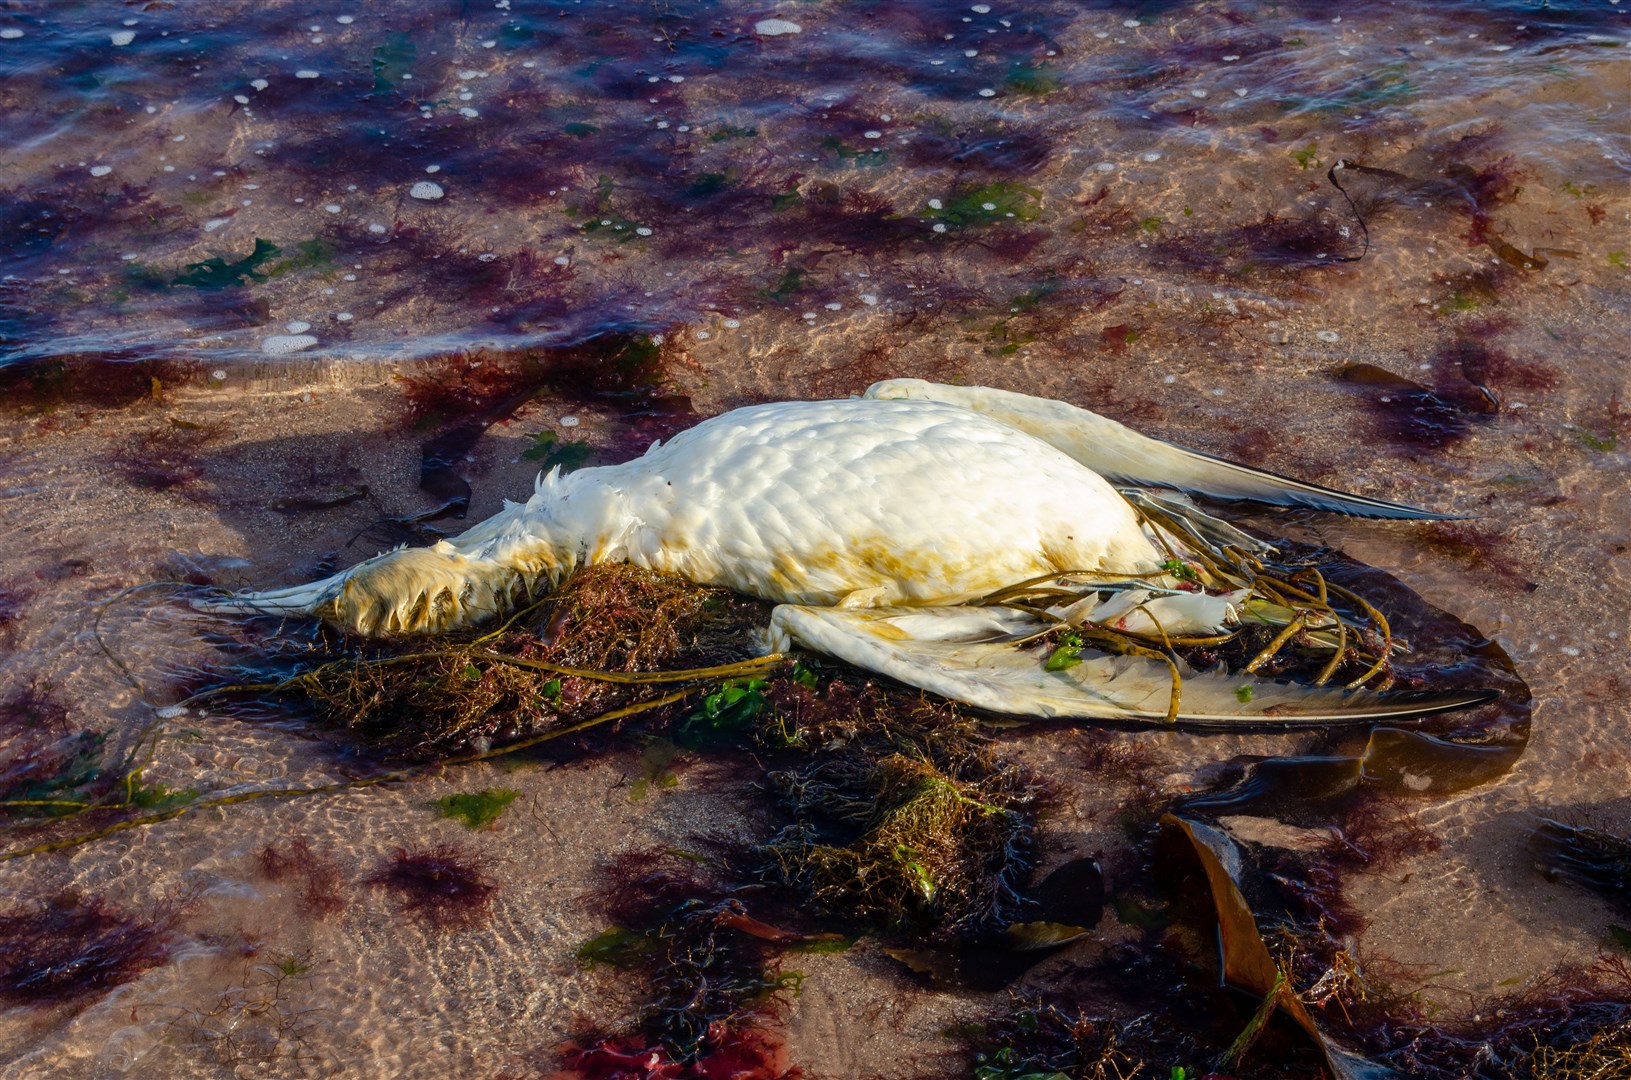 A dead gannet on a beach similar to those spotted by the swimmer at Portessie and Strathlene.